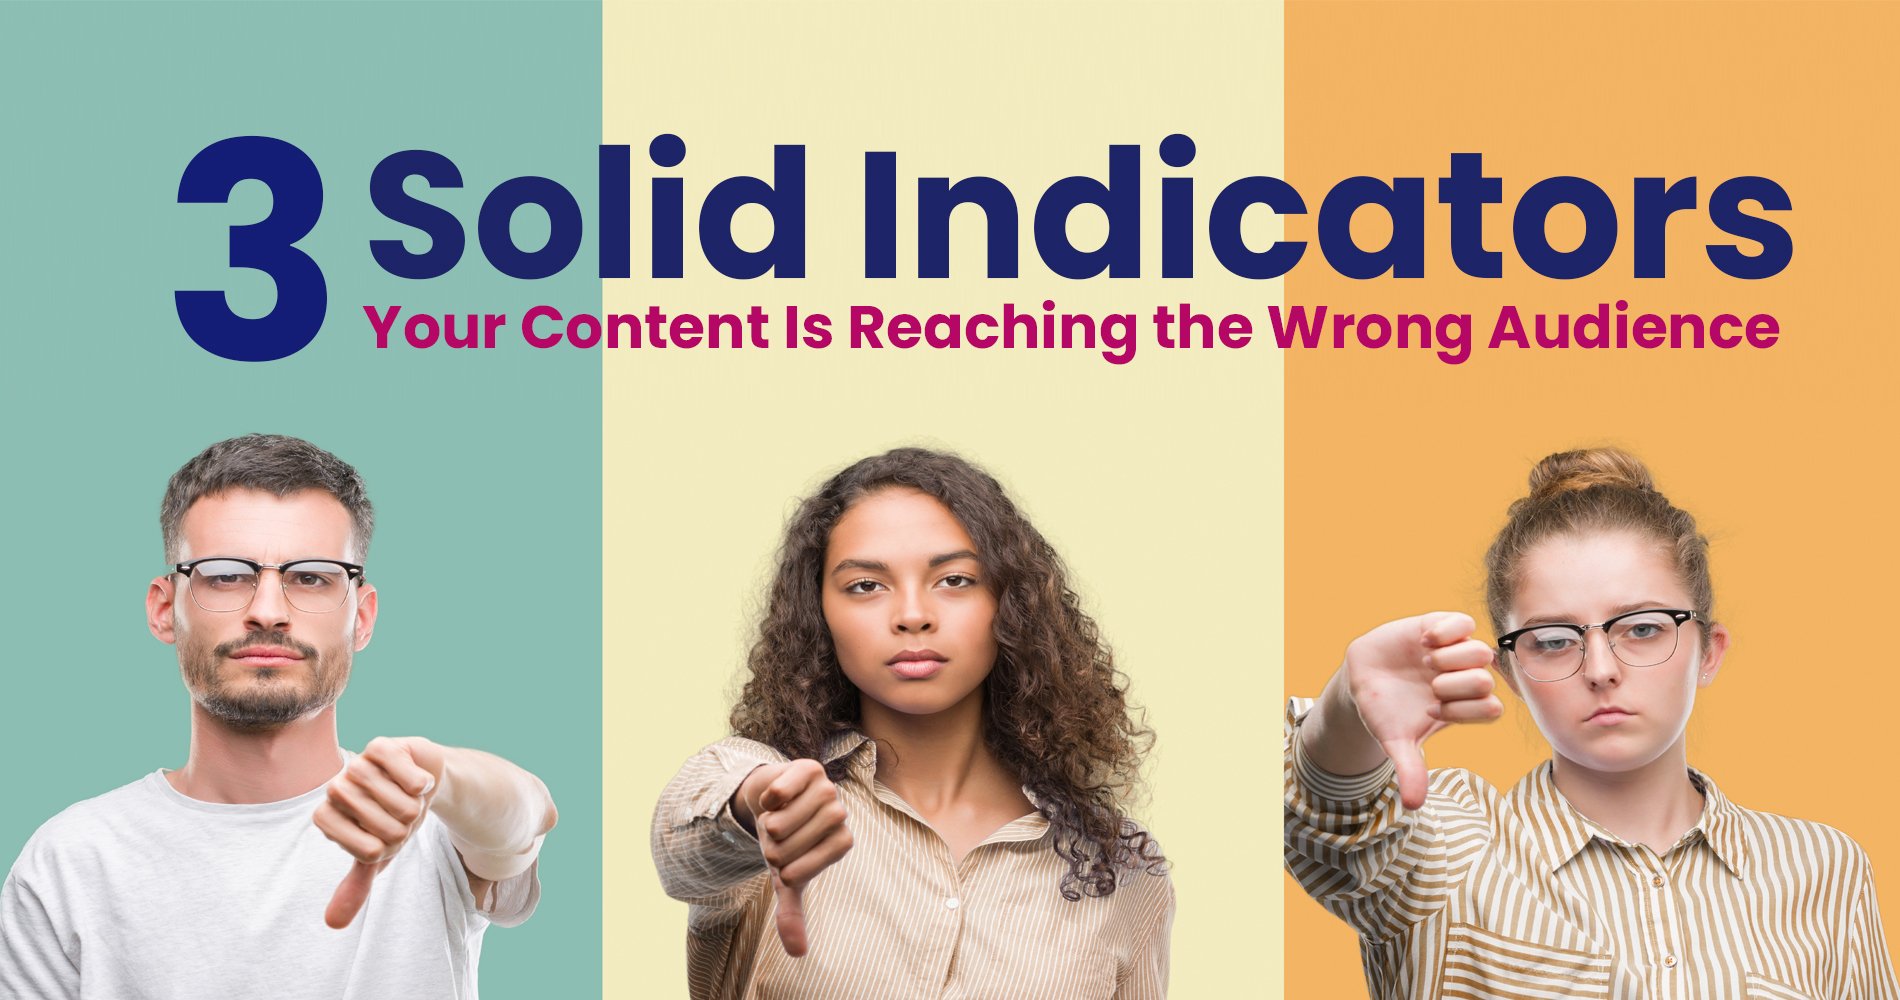 3 Solid Indicators Your Content Is Reaching the Wrong Audience